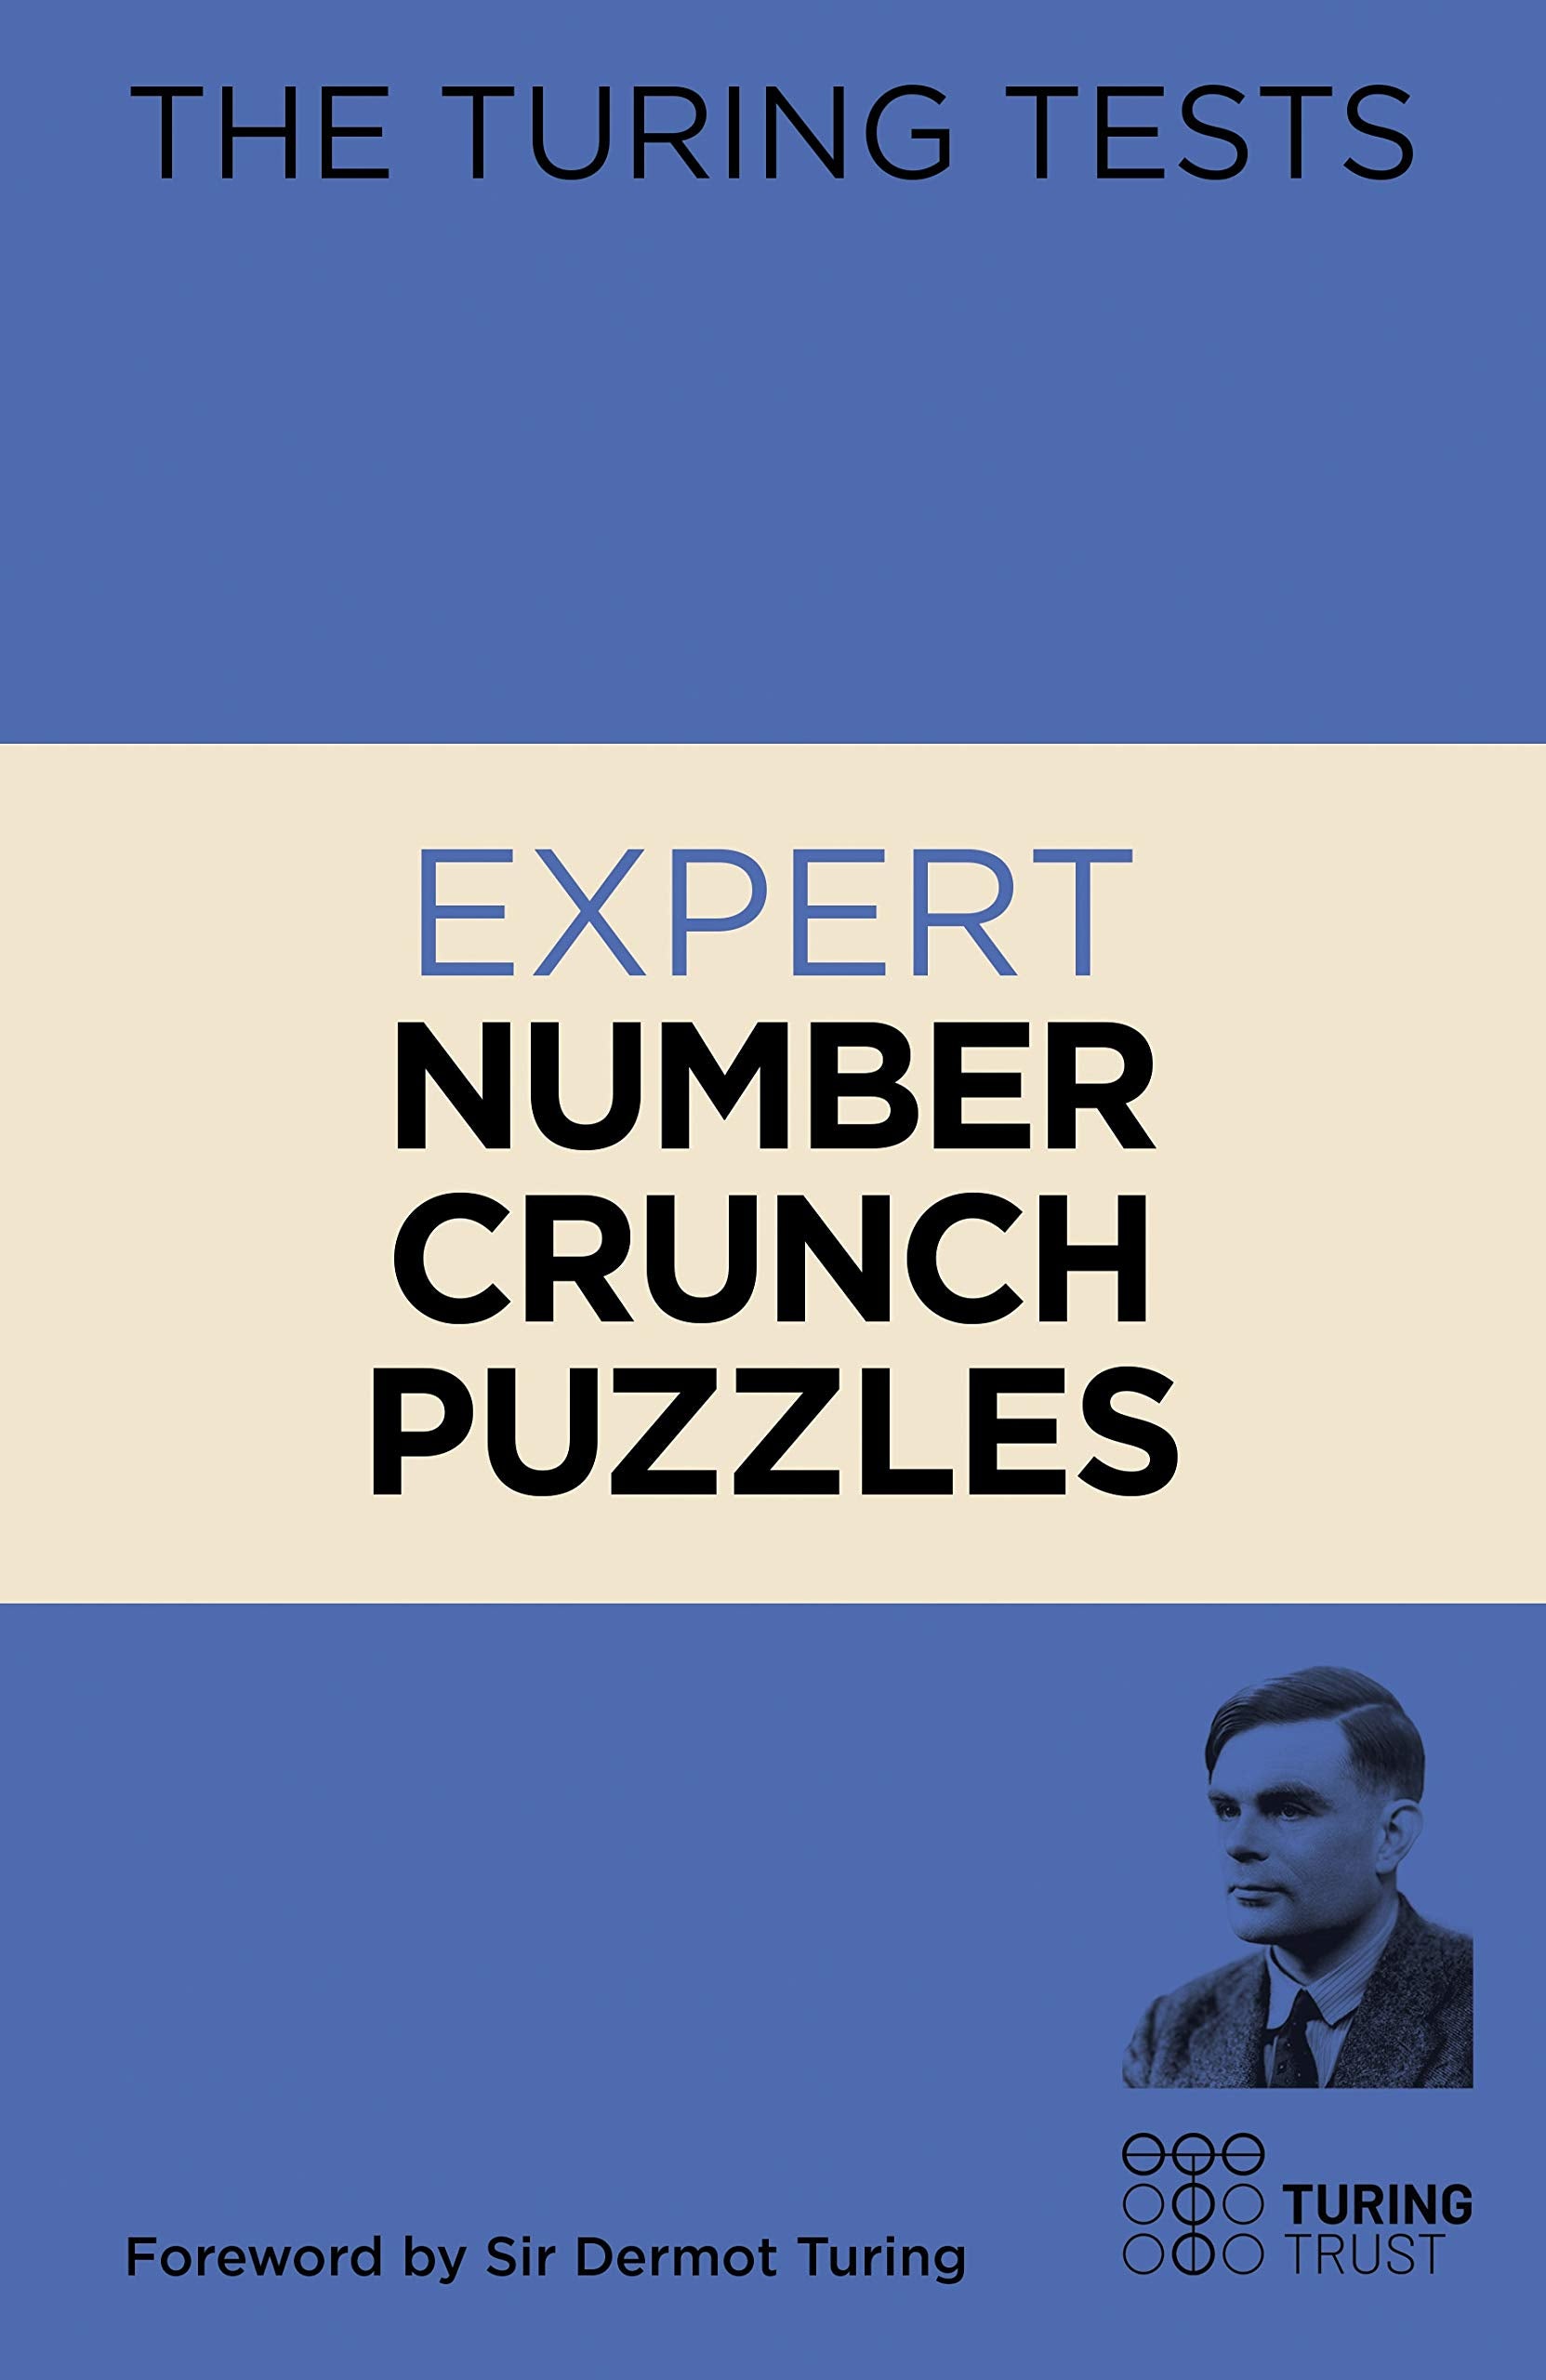 The Turing Tests Expert Number Crunch Puzzles: 9